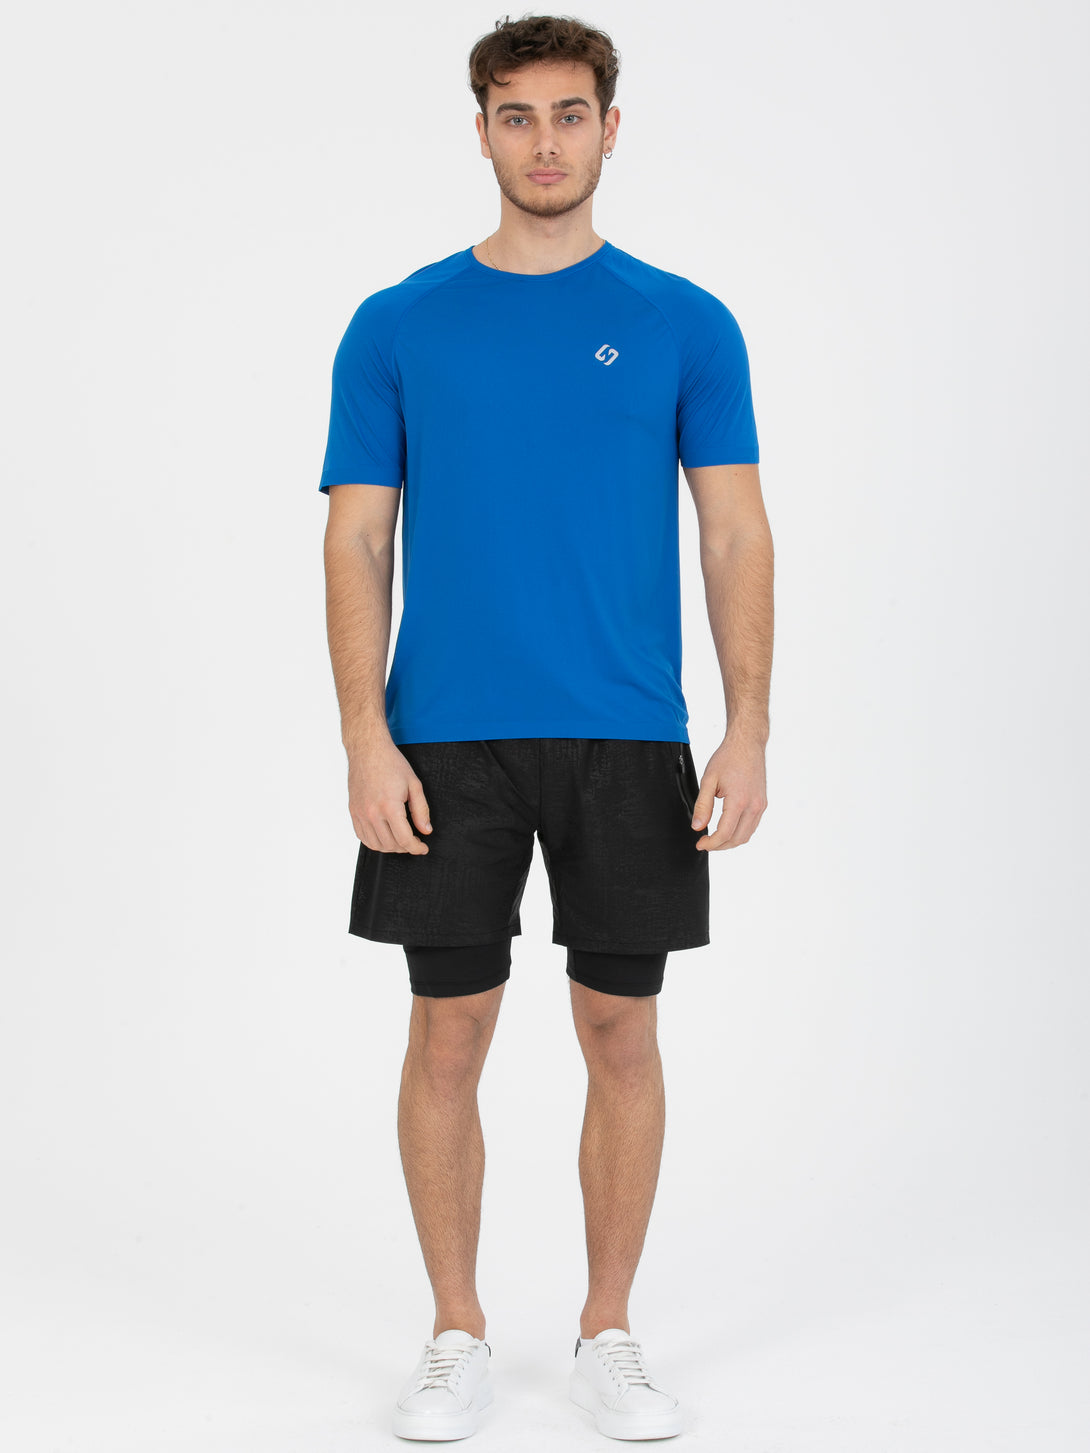 A Man Wearing Lapis Blue Color Seamless The Motion T-Shirt